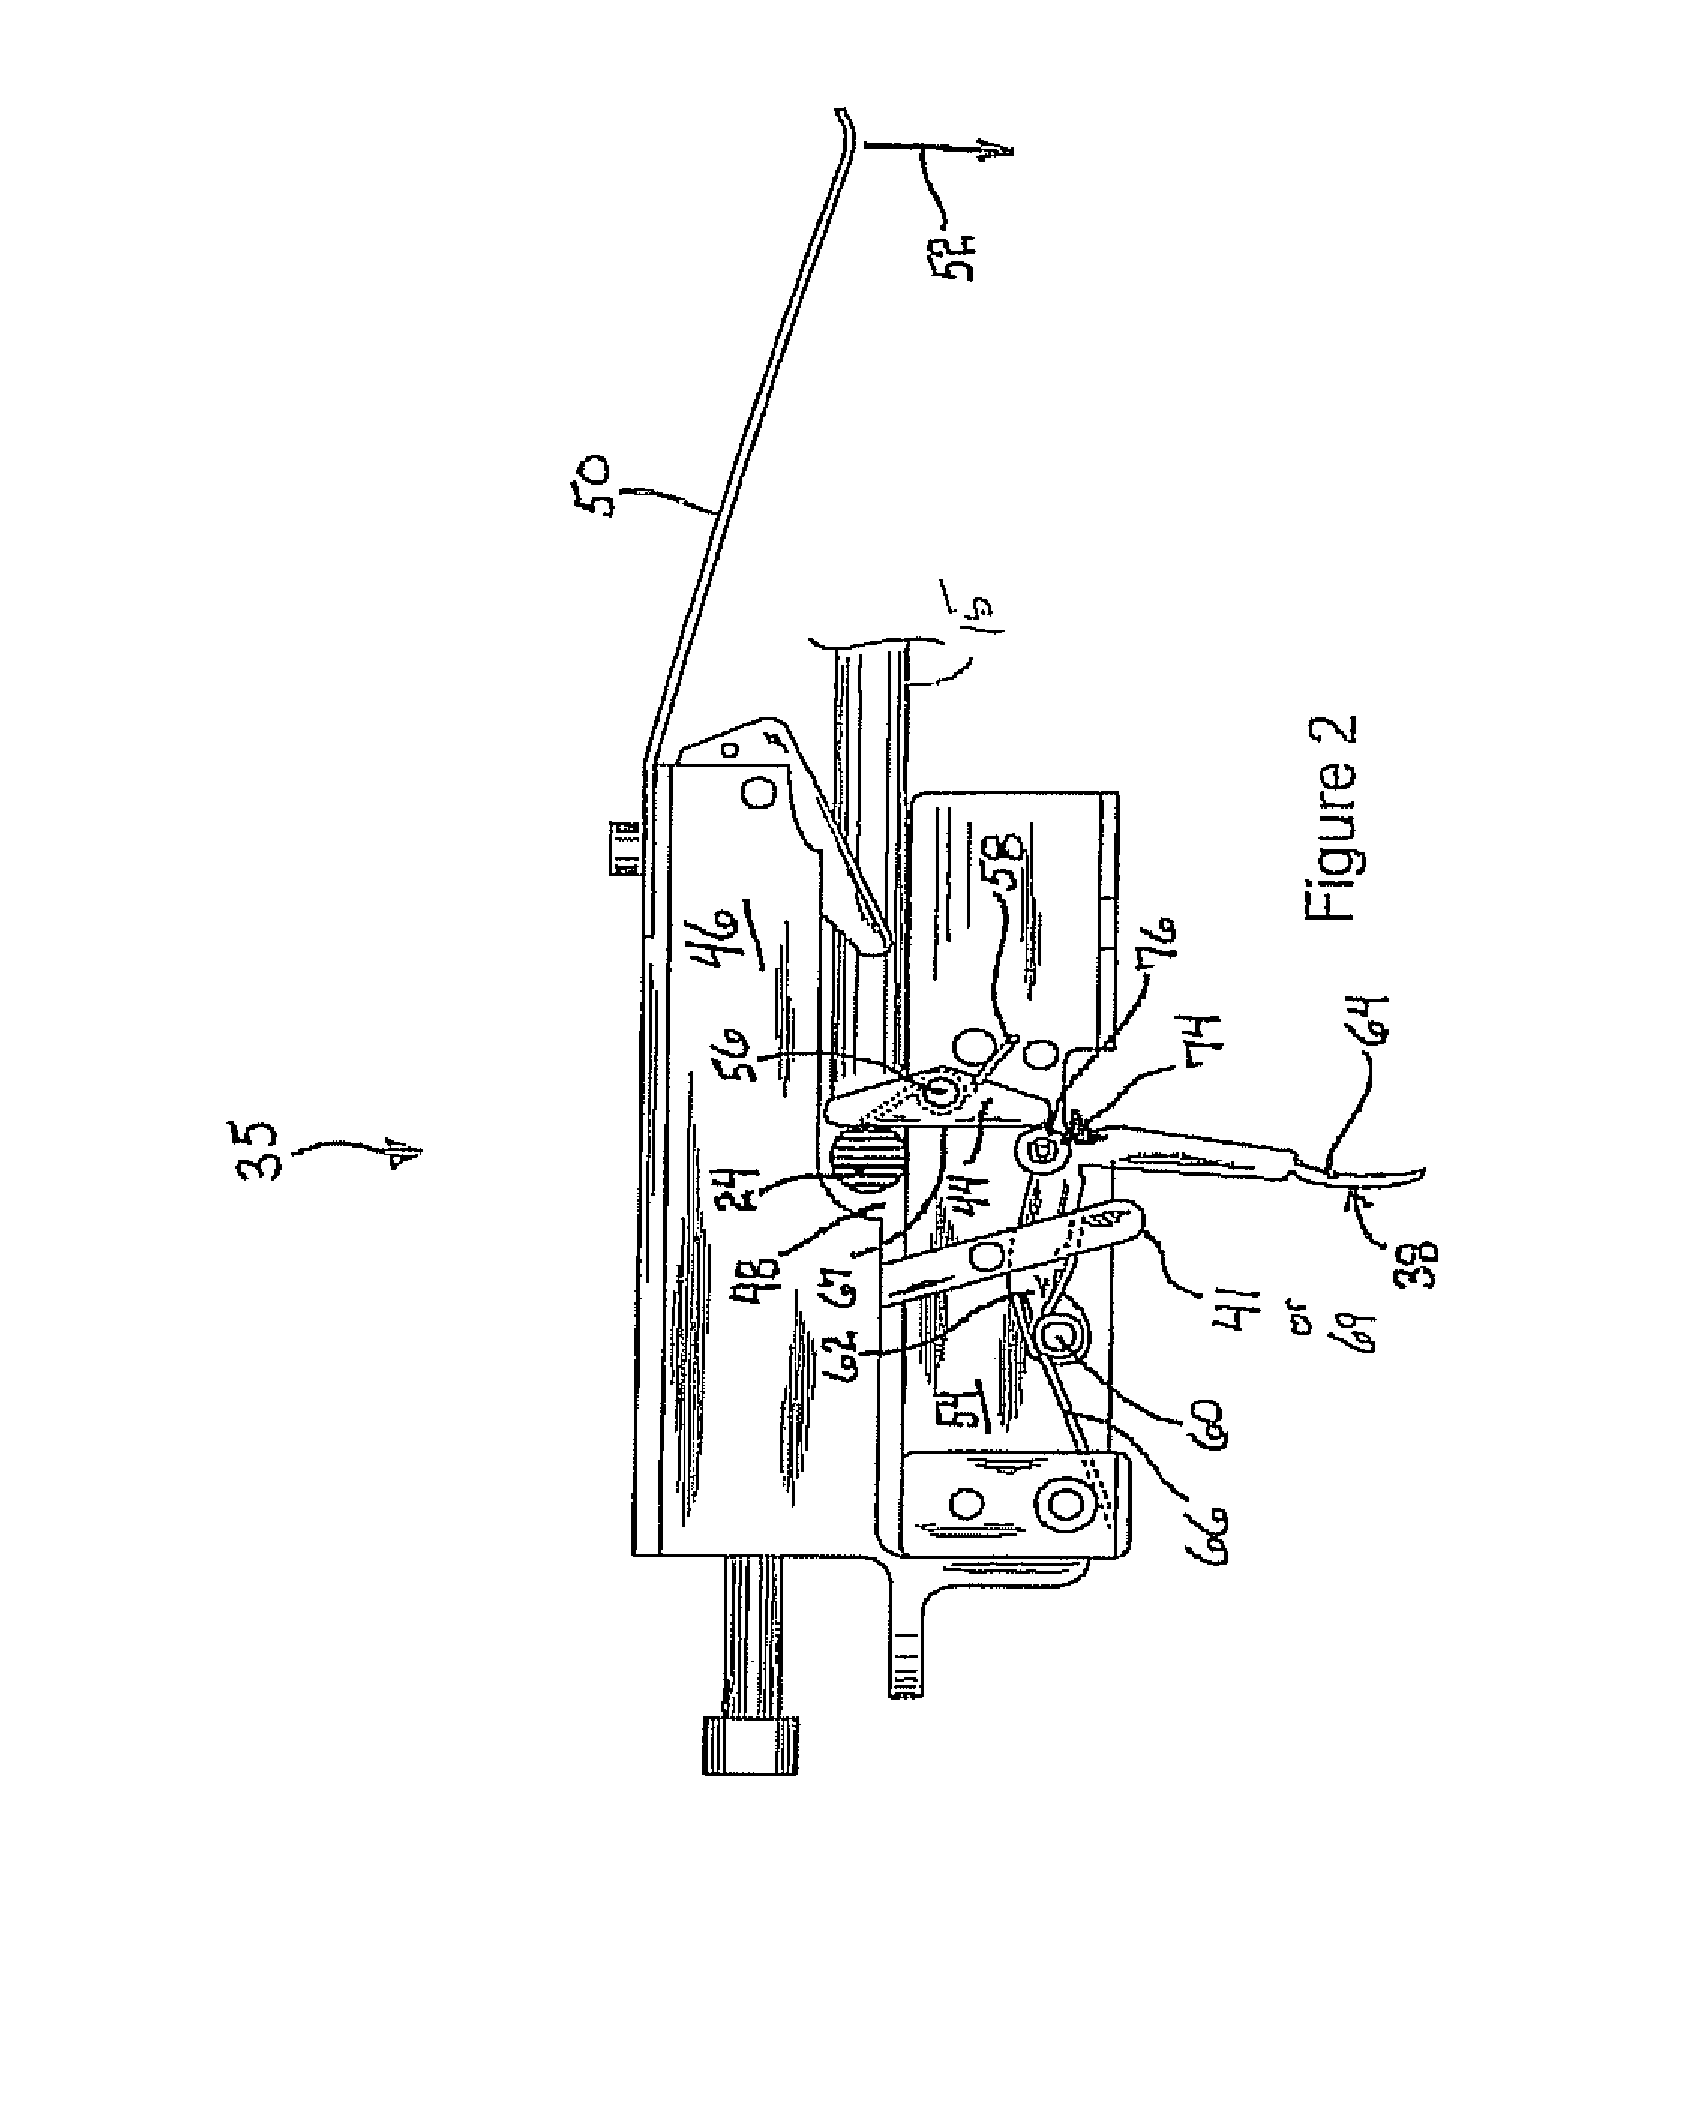 Trigger assembly for an archery device